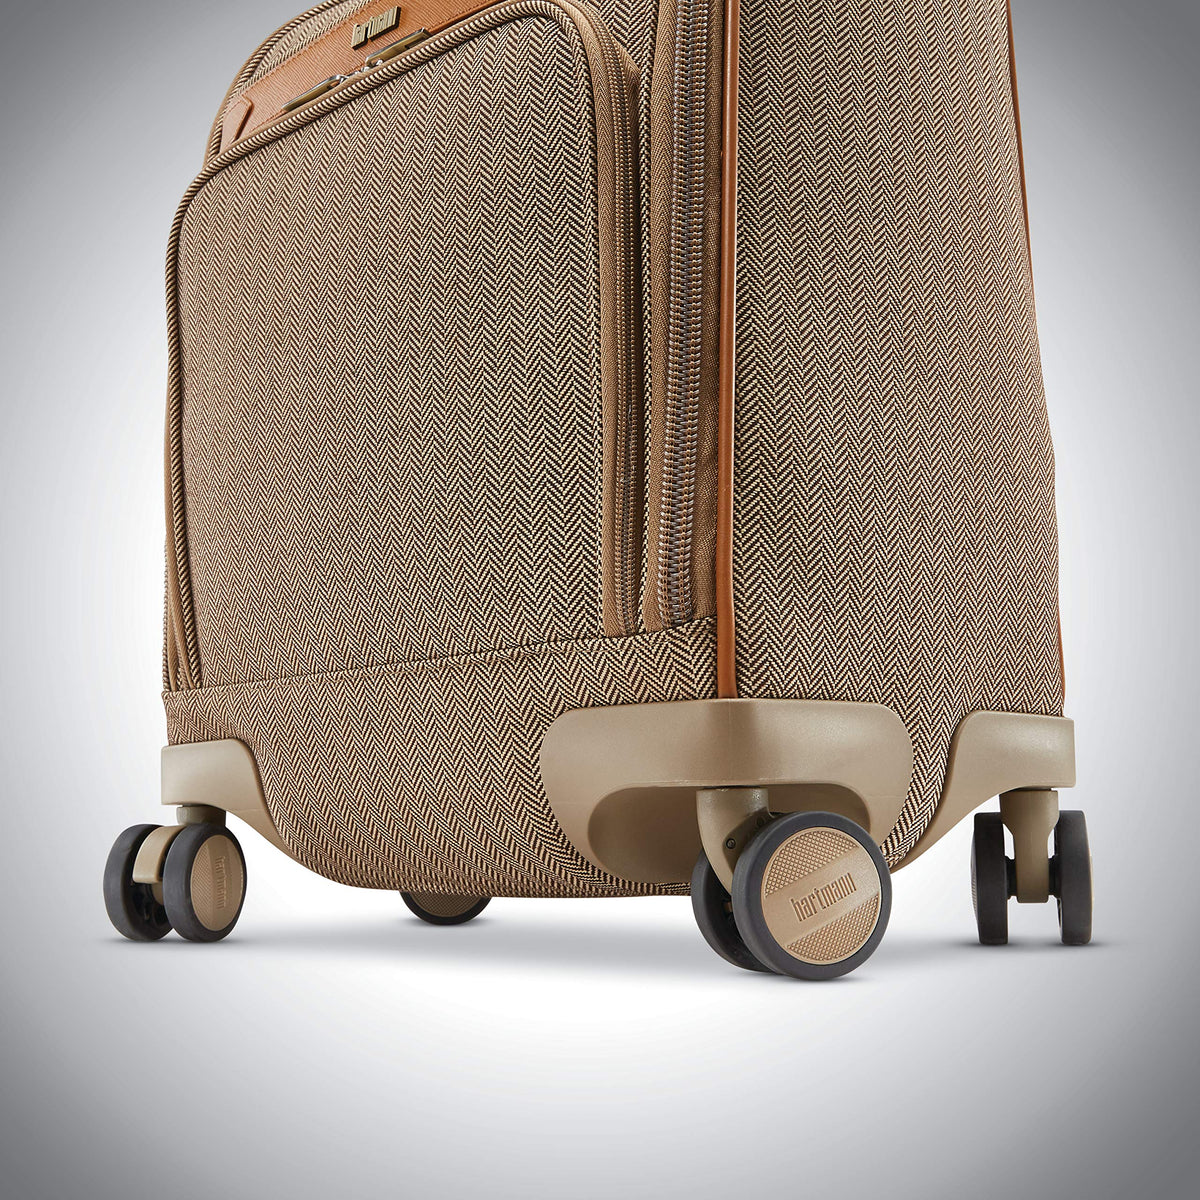 Hartmann LUXE Collection Hardside Medium Expandable Spinner 